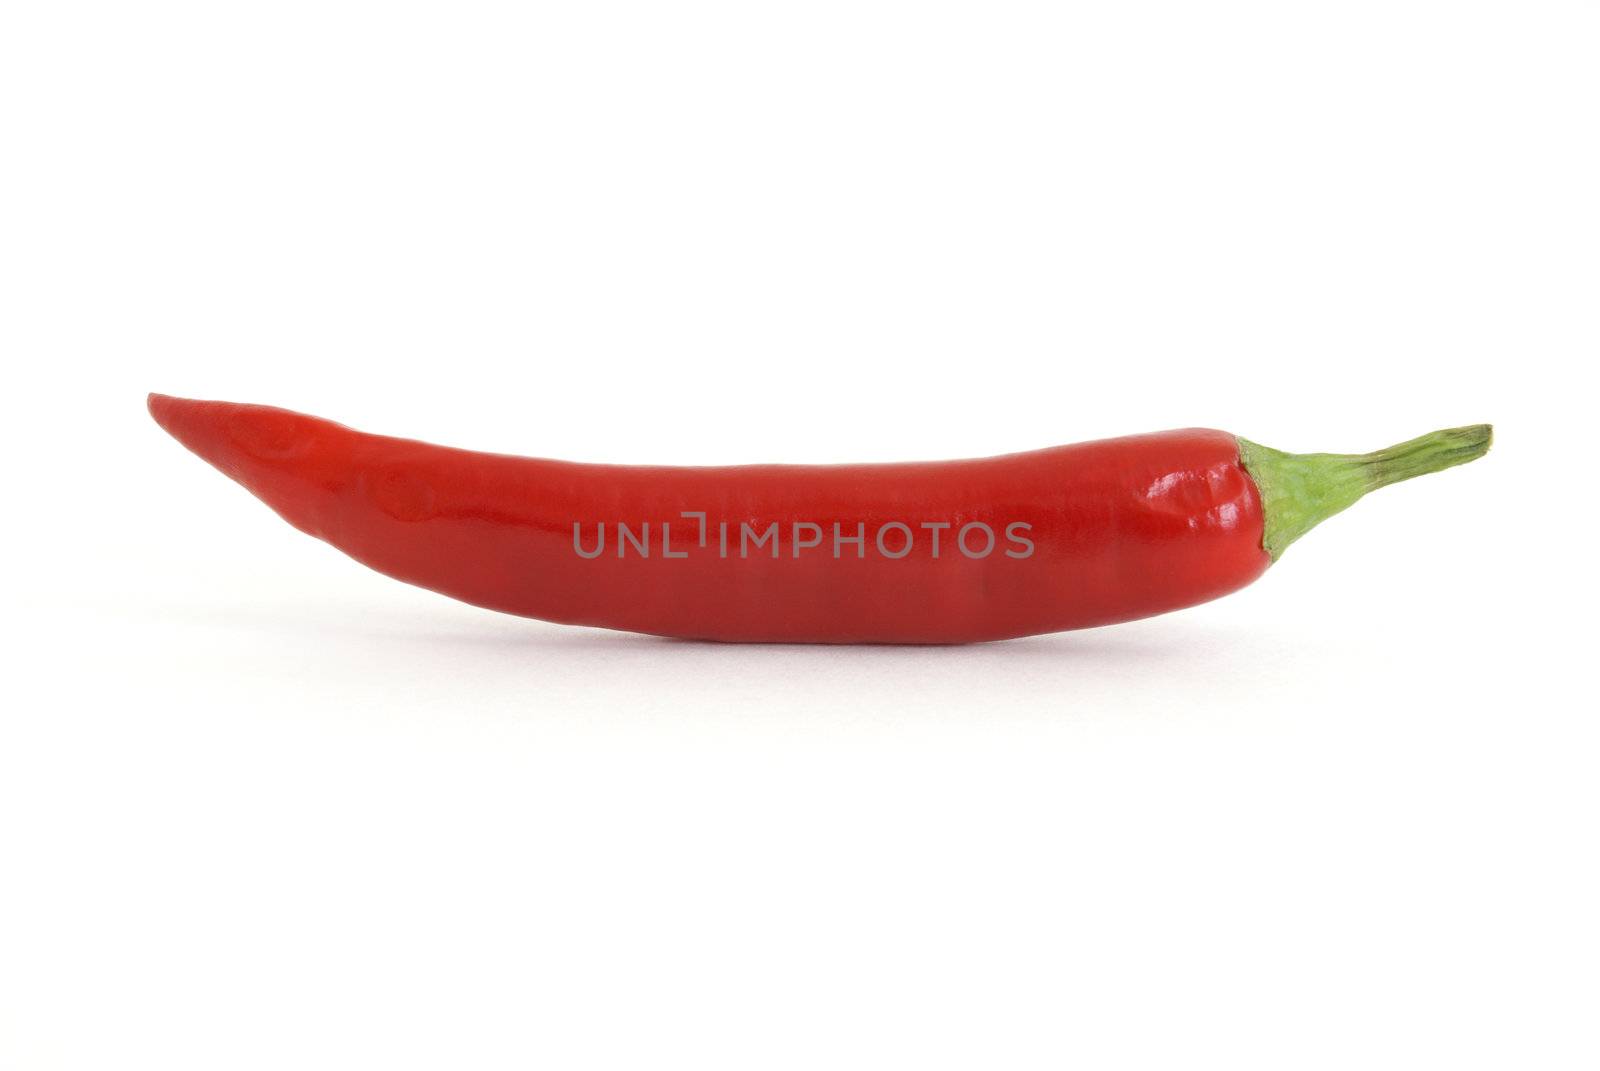 A fresh red chili pepper on white background.